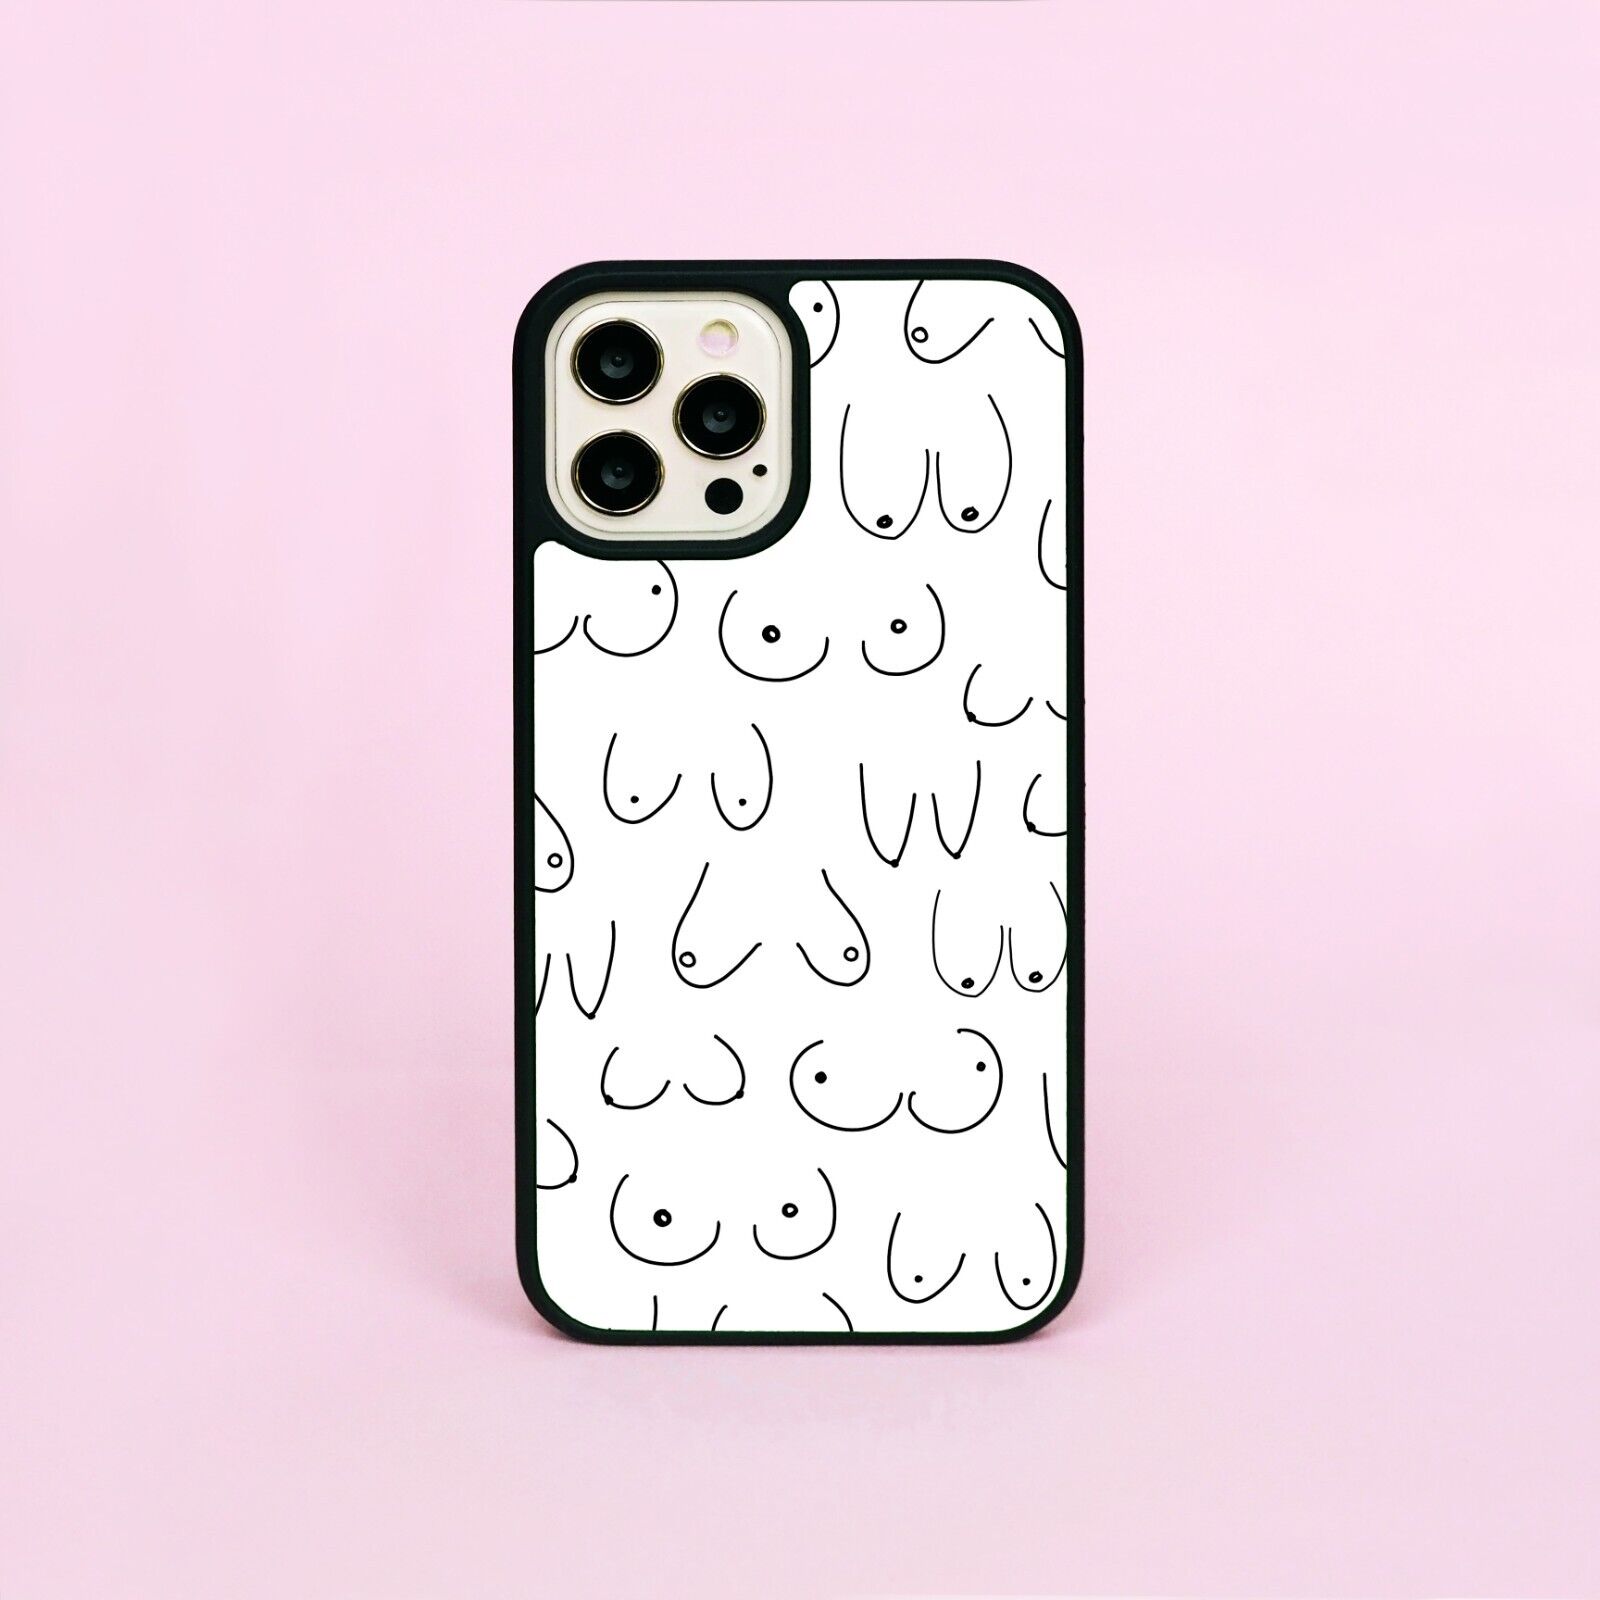 Phone Fashion: Embrace Style with a Boobs Phone Case插图4